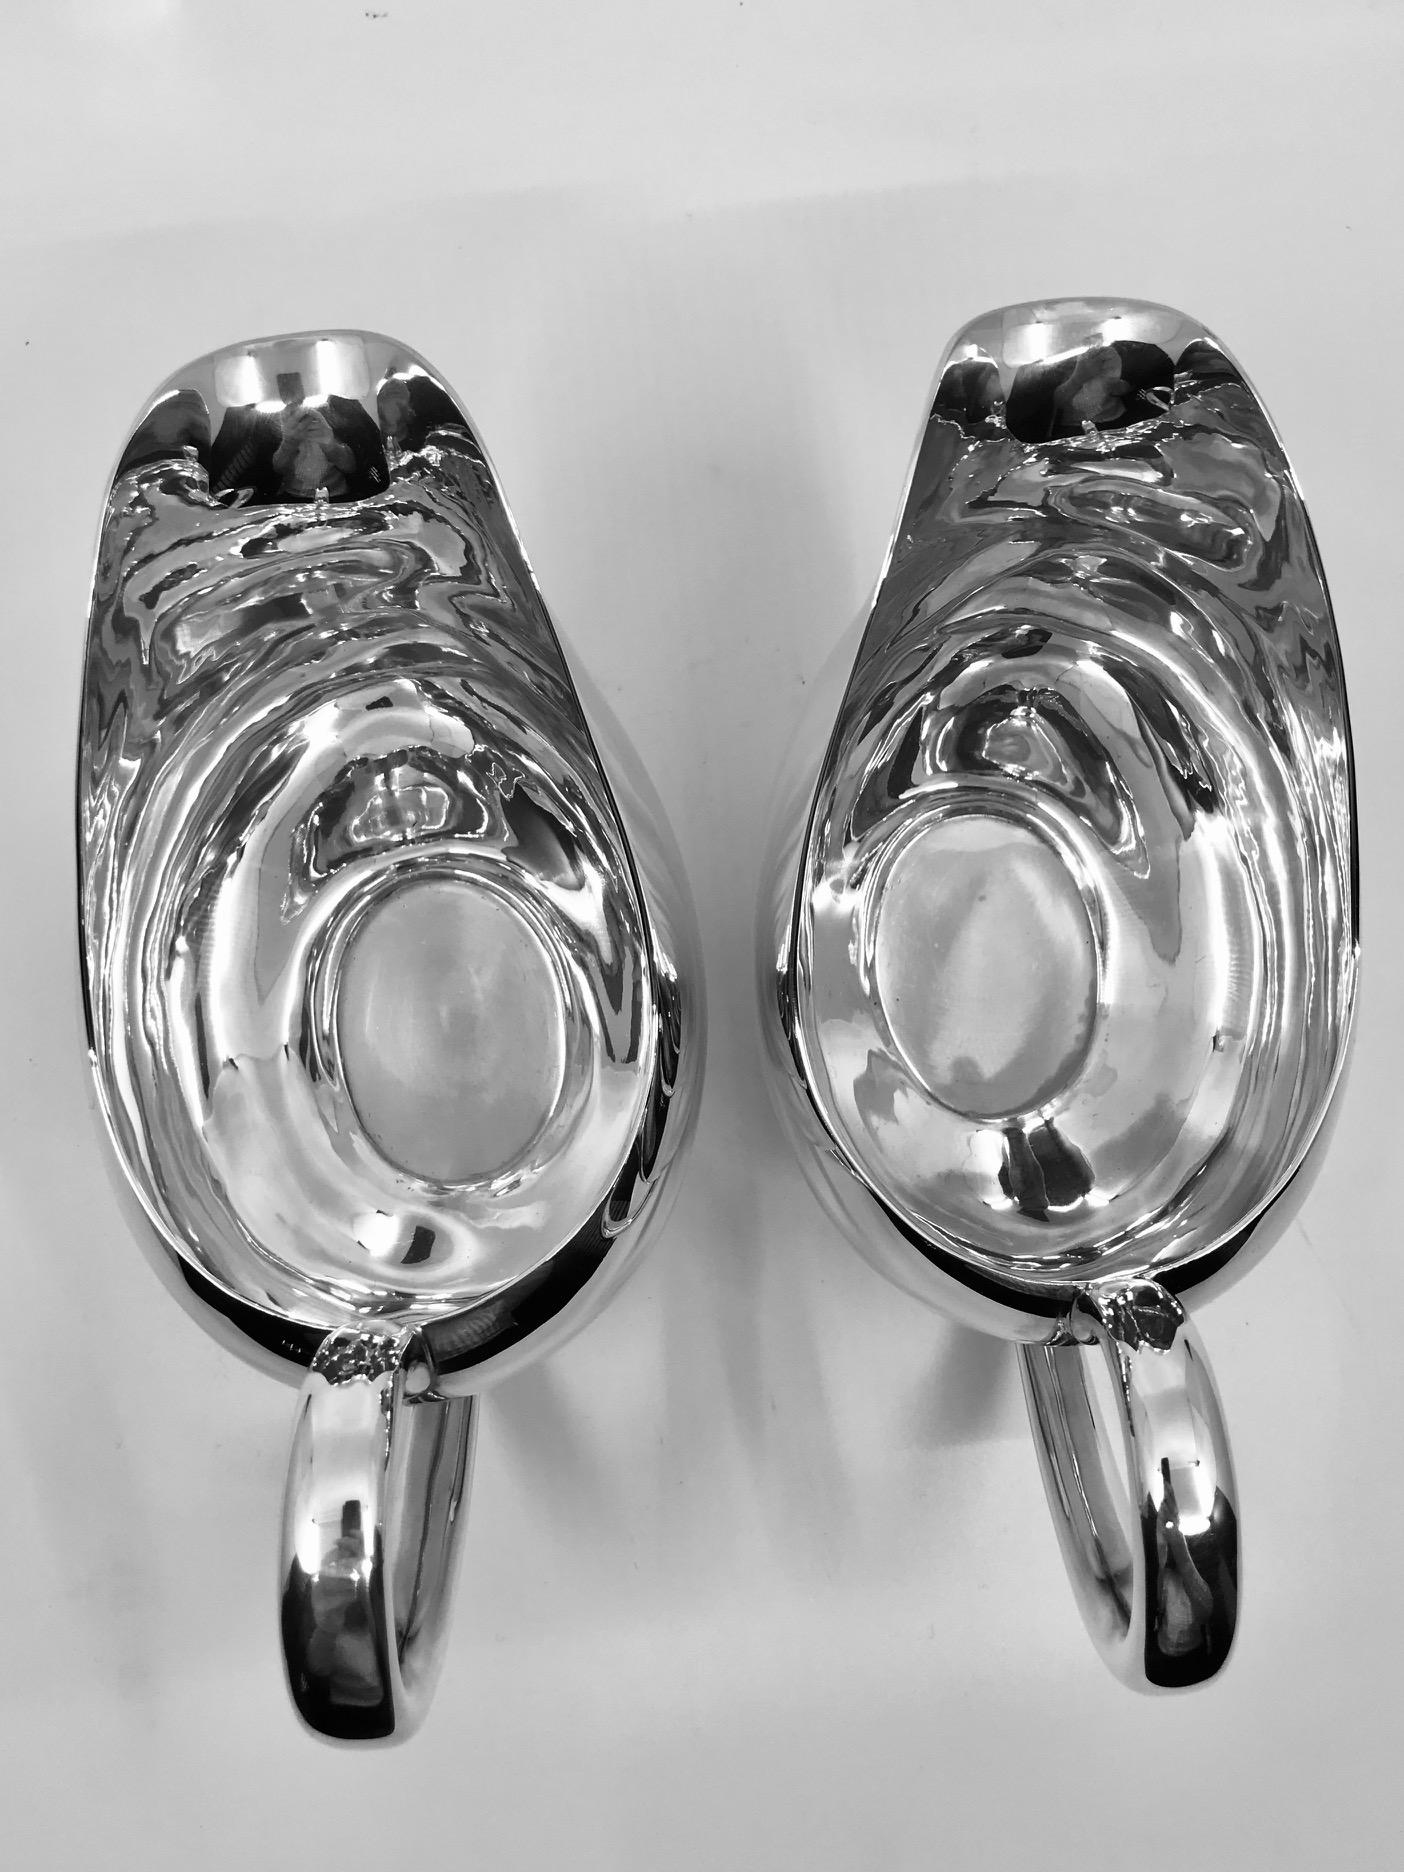 Hammered Pair of A. Michelsen Sauce Boats by Kay Fisker